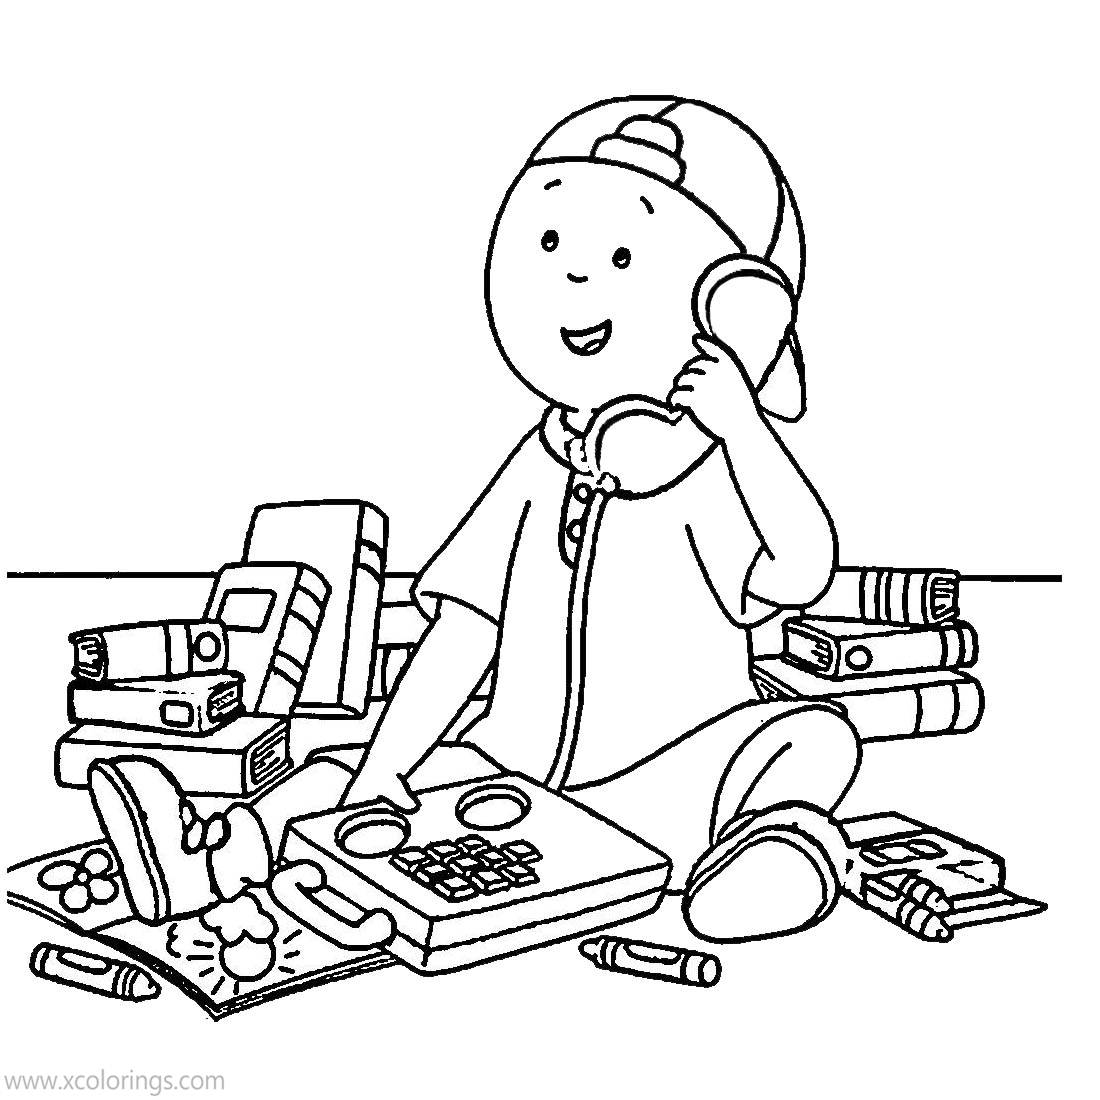 Free Caillou Coloring Pages Taking A Call printable